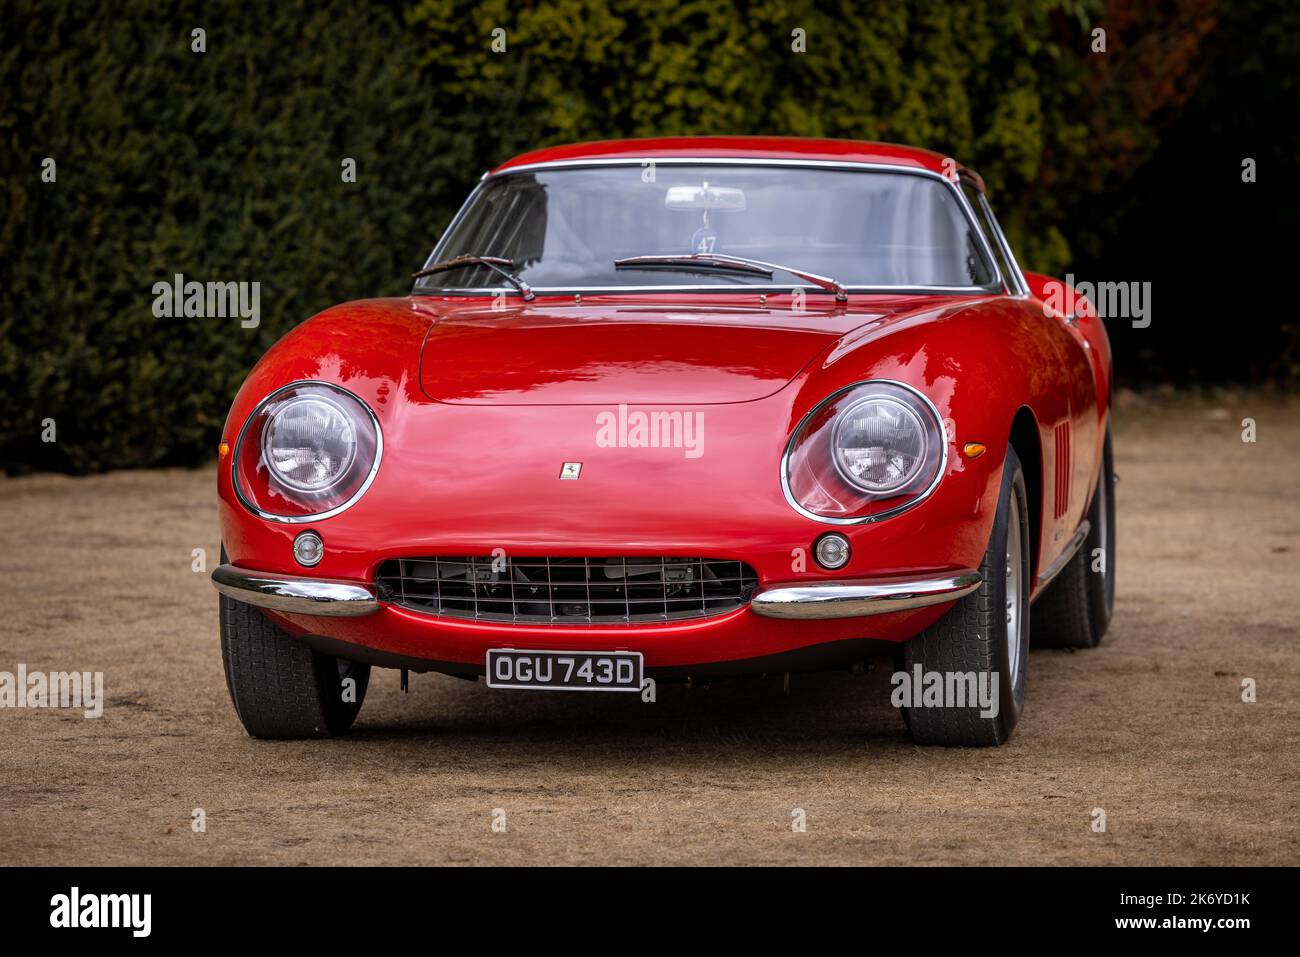 1966 Ferrari 275 GTB/C by Scaglietti ‘OGU 743D’ on display at the Concours d’Elégance motor show held at Blenheim Palace on the 4th September 2022 Stock Photo